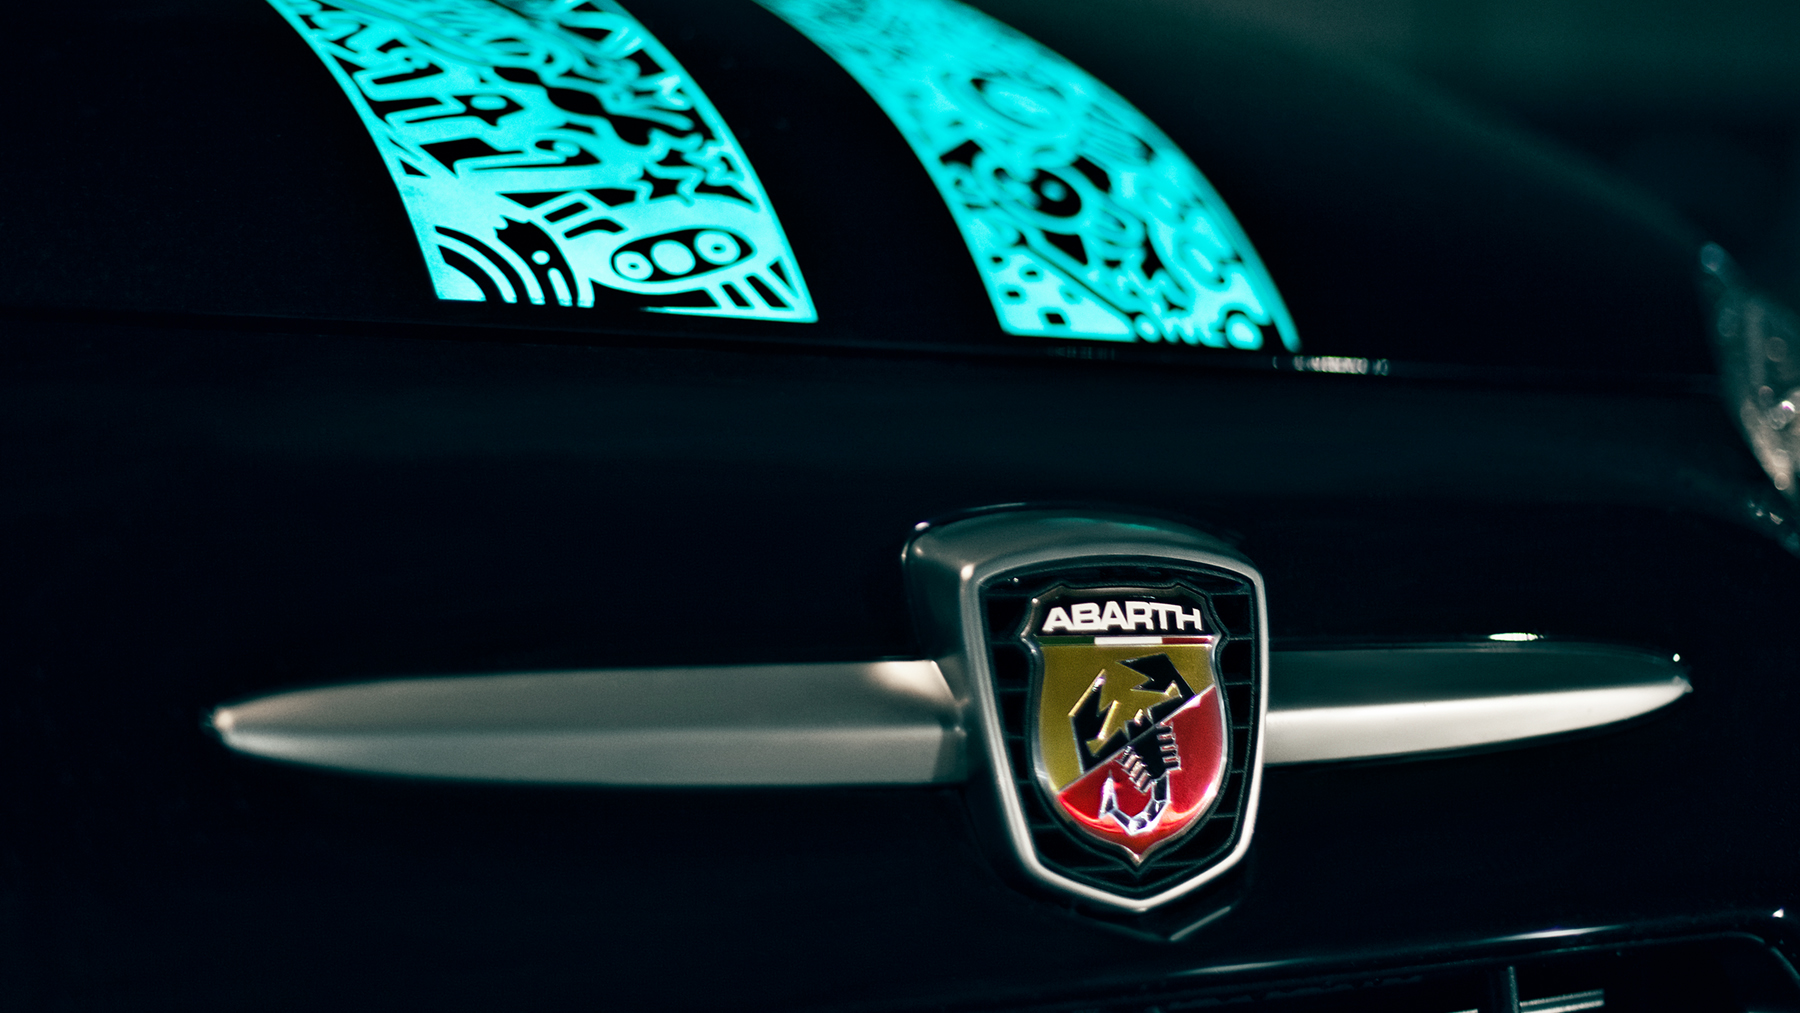 abarth shows one of a kind fiat 500 with scorpion skin paint img 5836 1 srgb 1800x1013